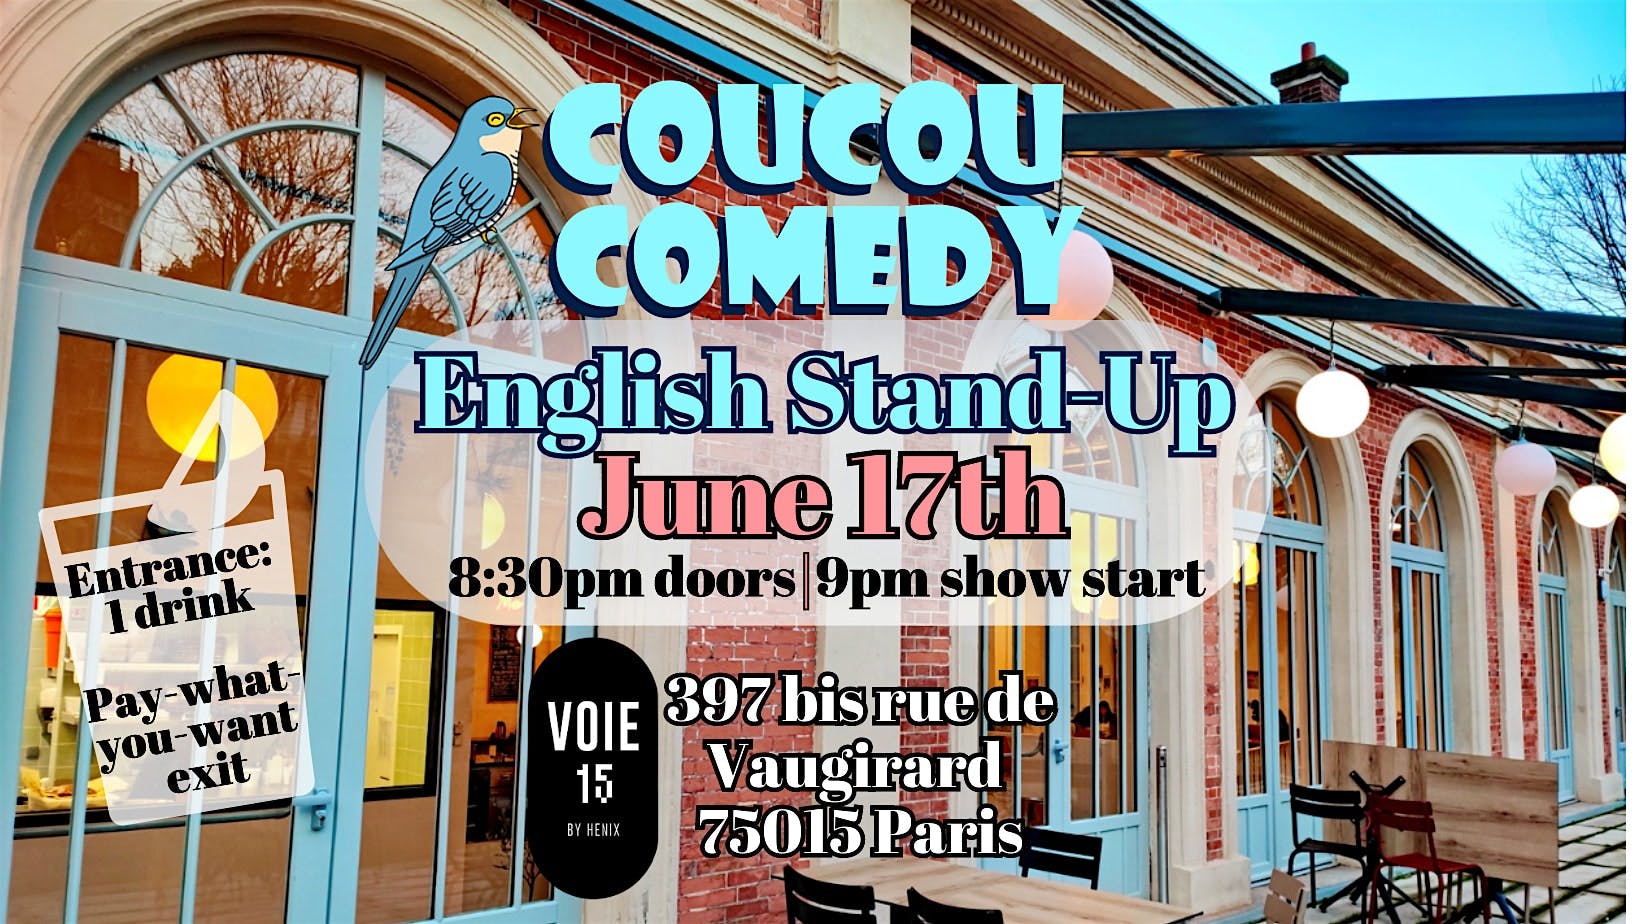 English Stand-Up Comedy at Voie 15 - Coucou Comedy logo